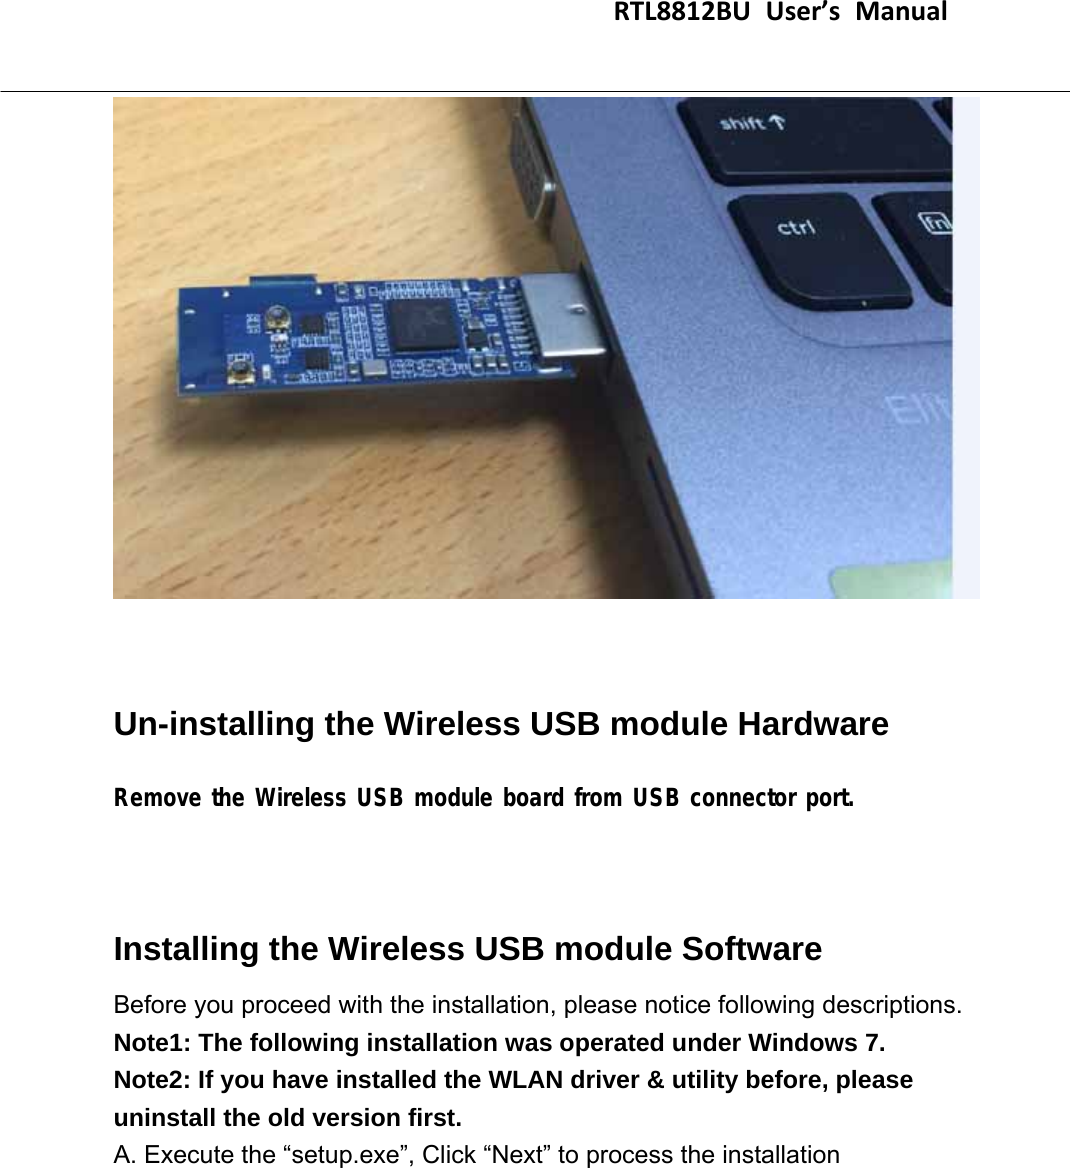                                    RTL8812BUUser’sManual                                      Un-installing the Wireless USB module Hardware   Remove the Wireless USB module board from USB connector port.   Installing the Wireless USB module Software   Before you proceed with the installation, please notice following descriptions. Note1: The following installation was operated under Windows 7. Note2: If you have installed the WLAN driver &amp; utility before, please uninstall the old version first. A. Execute the “setup.exe”, Click “Next” to process the installation 